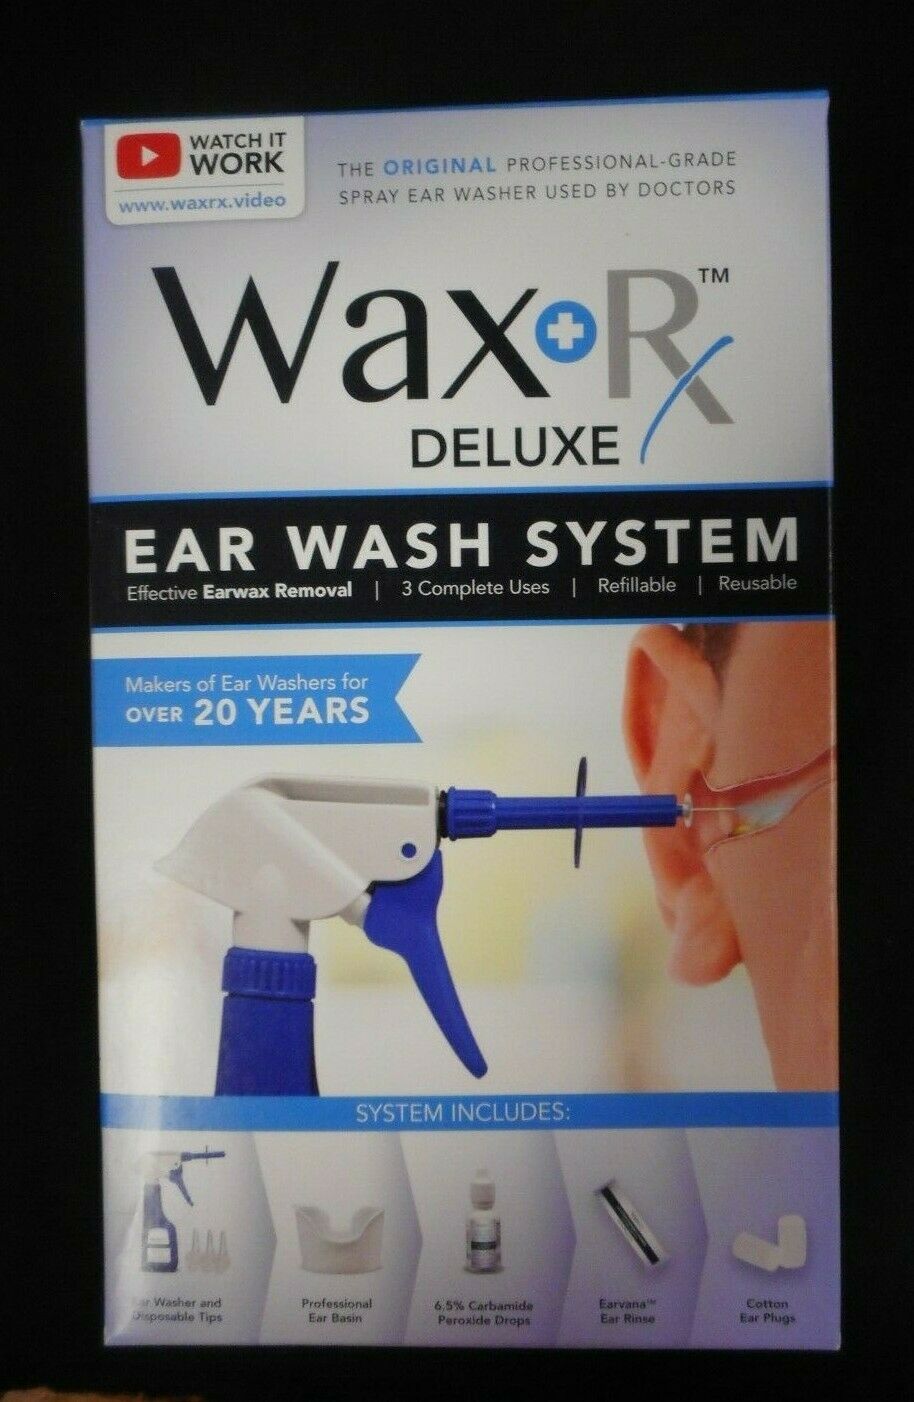 Wax + Rx Deluxe Ear Wash System Effective Ear Wax Removal 3 Complete Uses New.